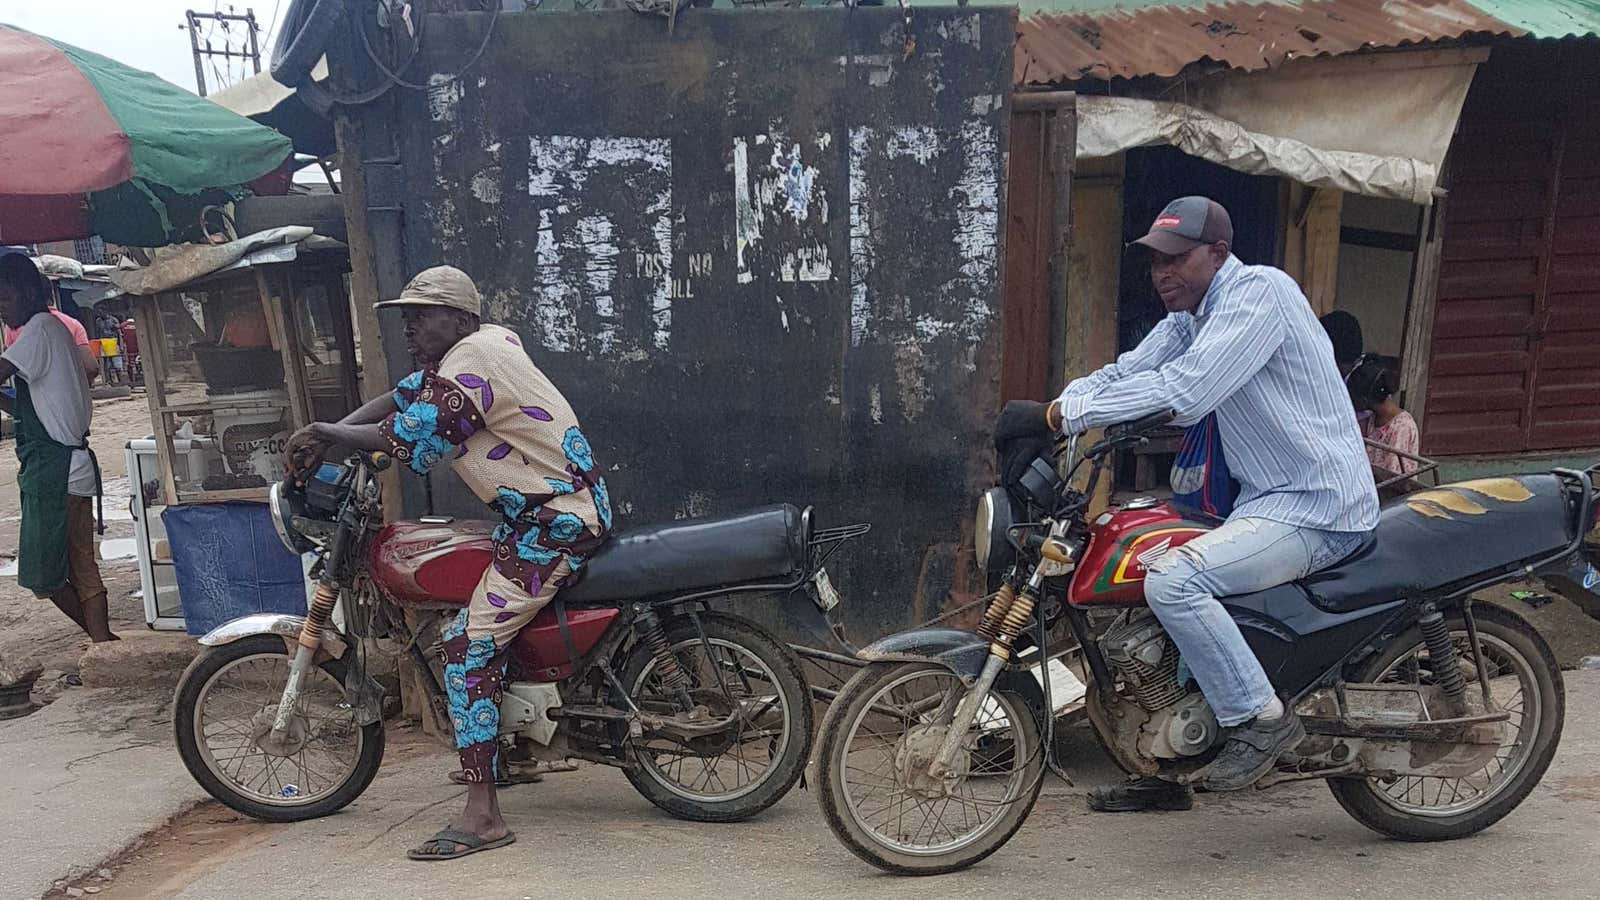 Motorcycle taxis, aka “Okadas” wait for riders on Saturday, April 4 in a Lagos suburb